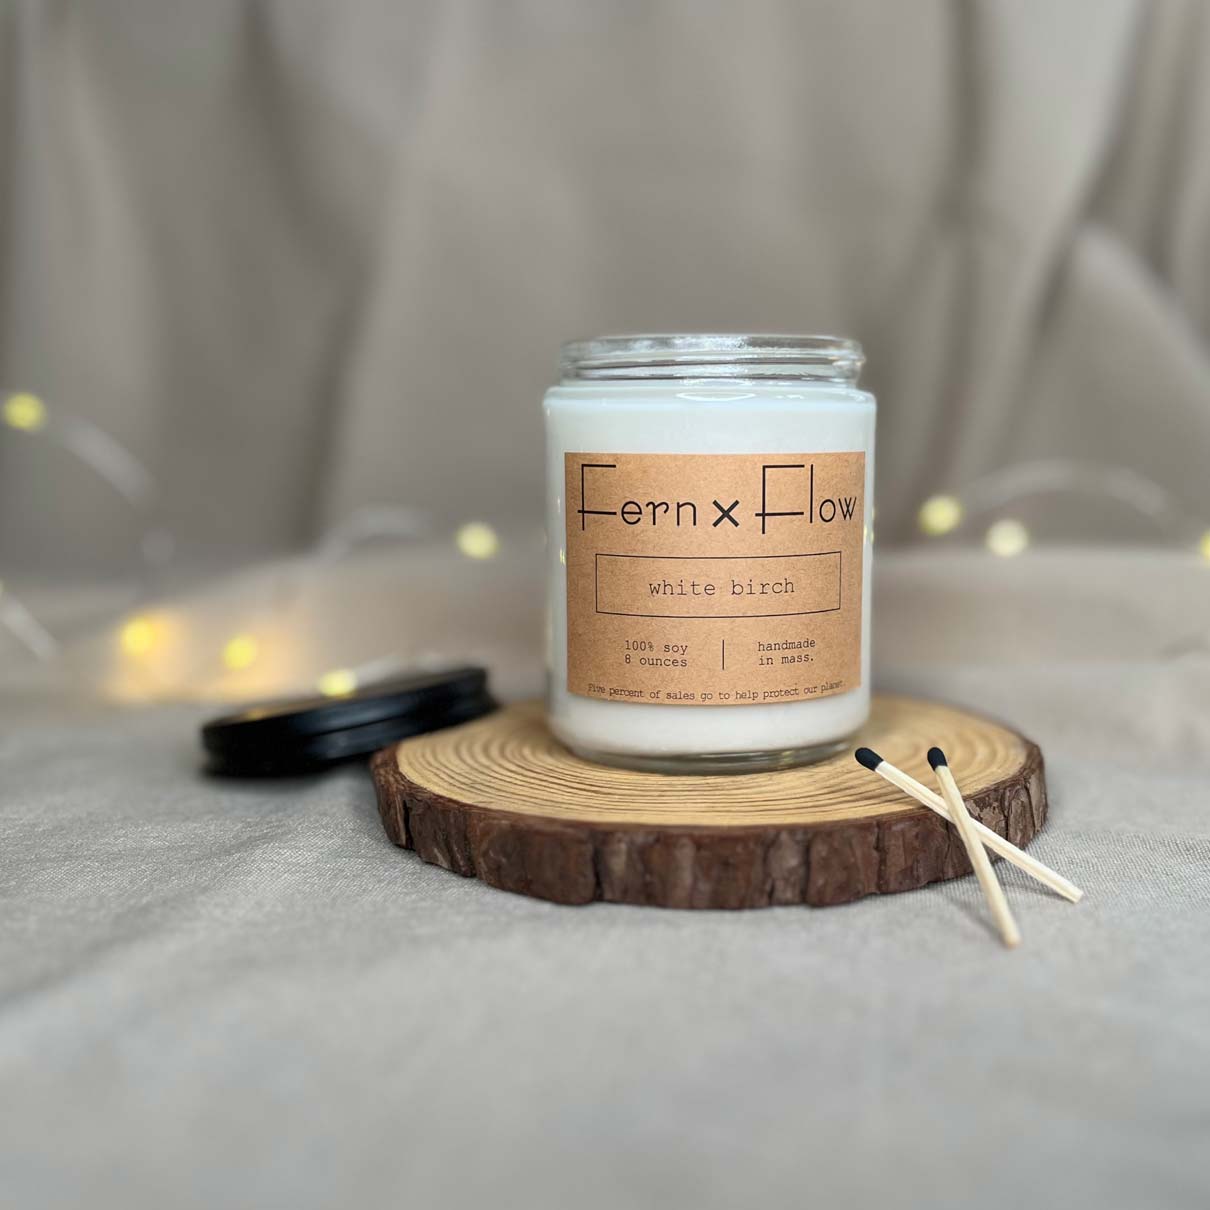 Fern x Flow eight-ounce White Birch scented holiday soy candle on a rustic wooden riser with black tipped safety matched in the foreground and white, Christmas lights in the background.